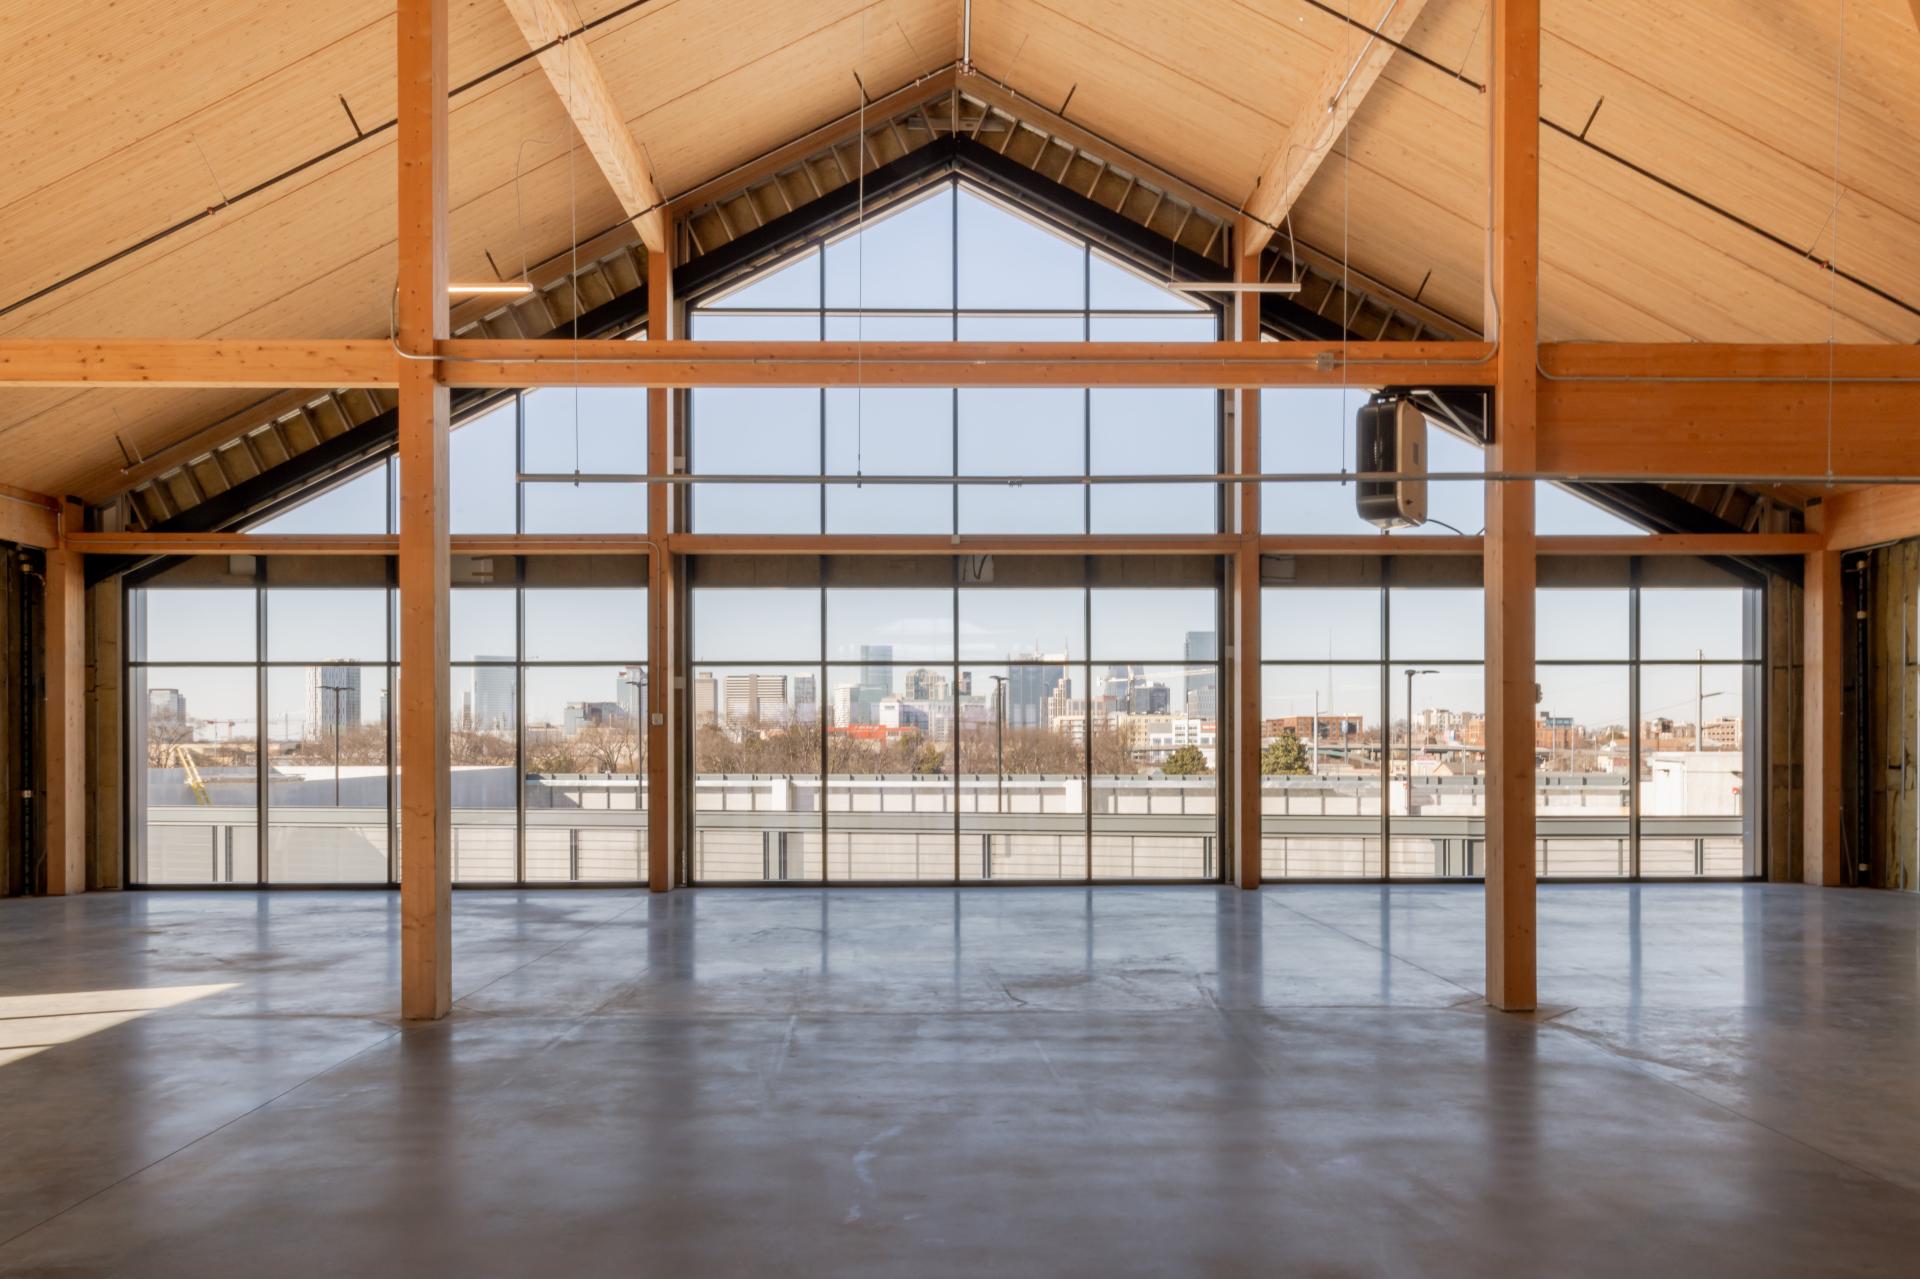 As the city’s first large-scale, modern mass timber building, Nashville Warehouse Co. offers contemporary Class A office space with 14-foot floor-to-floor heights, floor-to-ceiling windows, and voluminous, daylit interior spaces